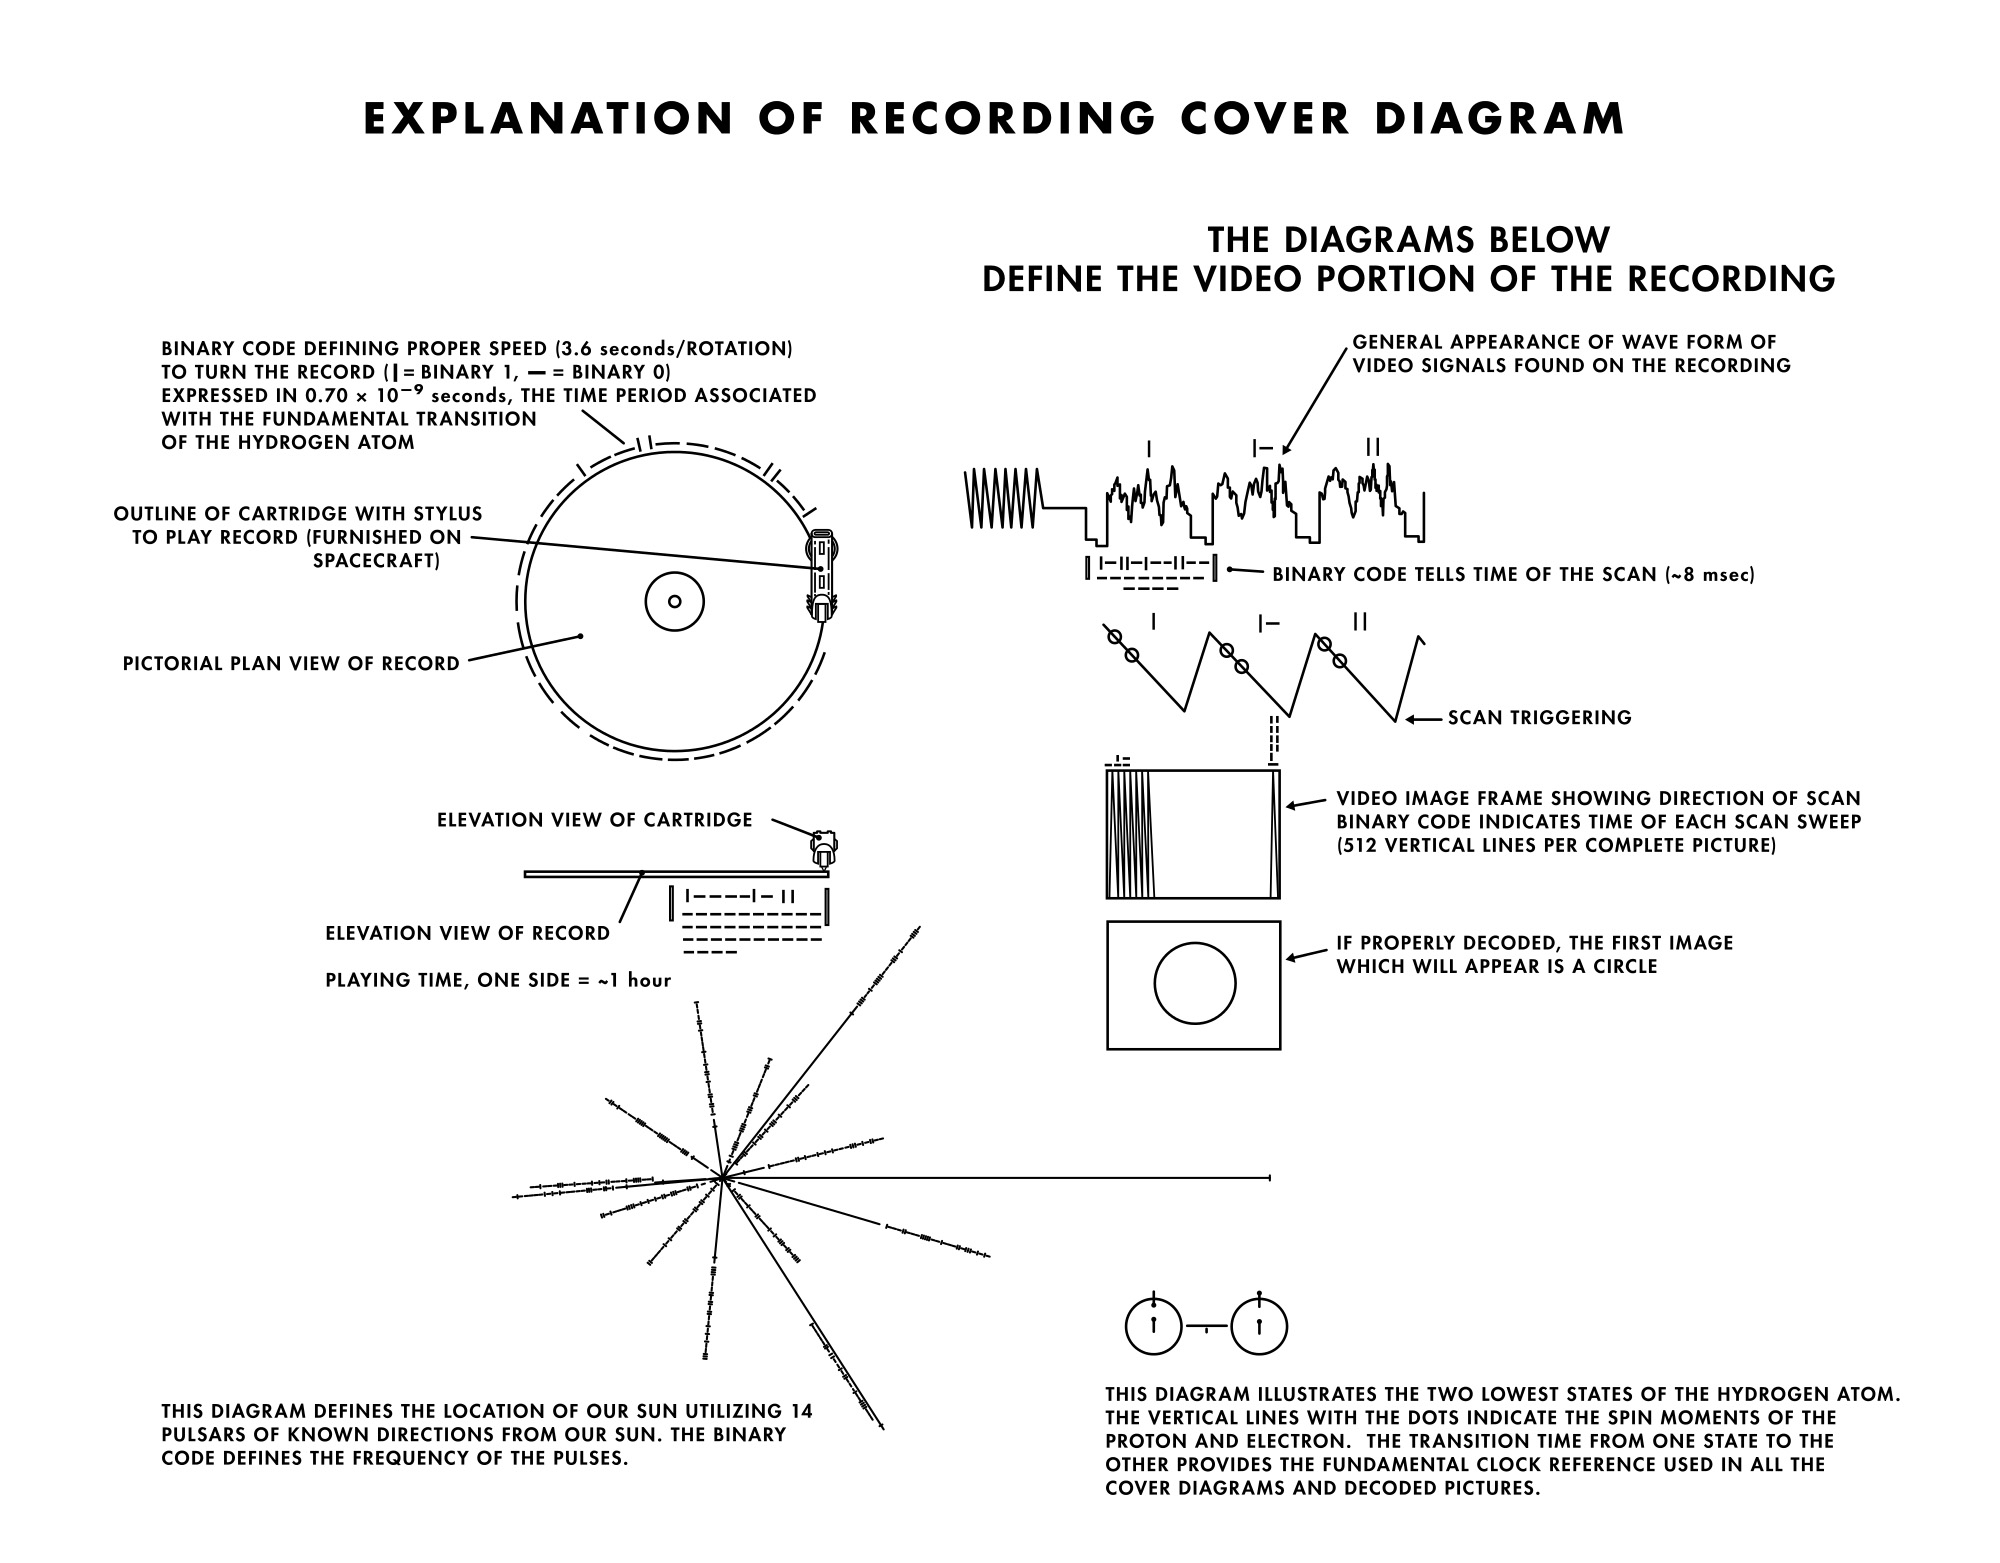 voyager 2 golden record contents